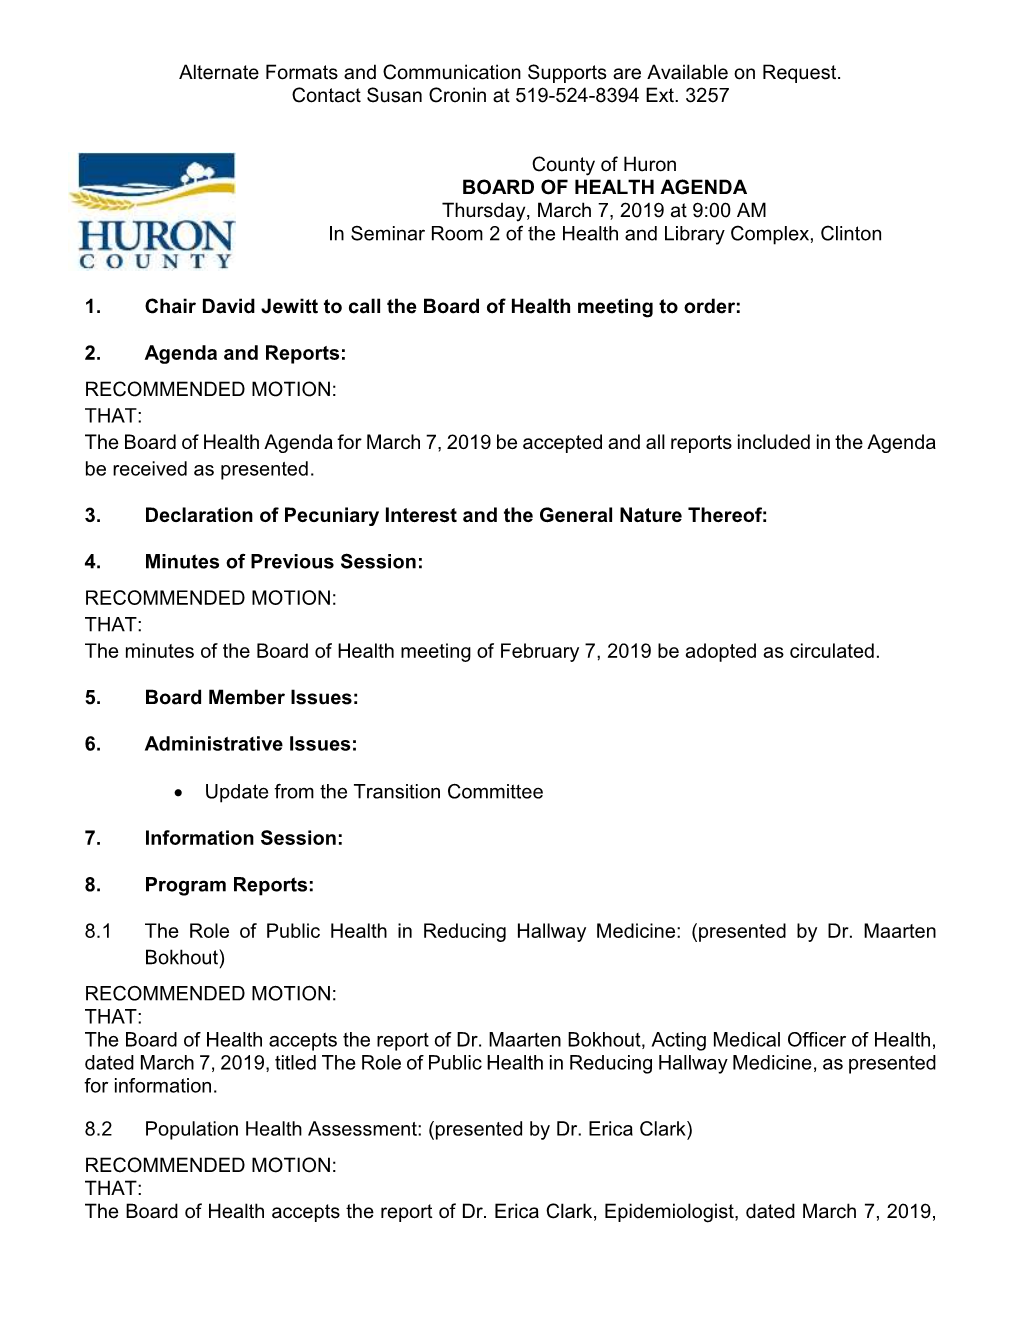 County of Huron Board of Health Minutes Package March 7, 2019